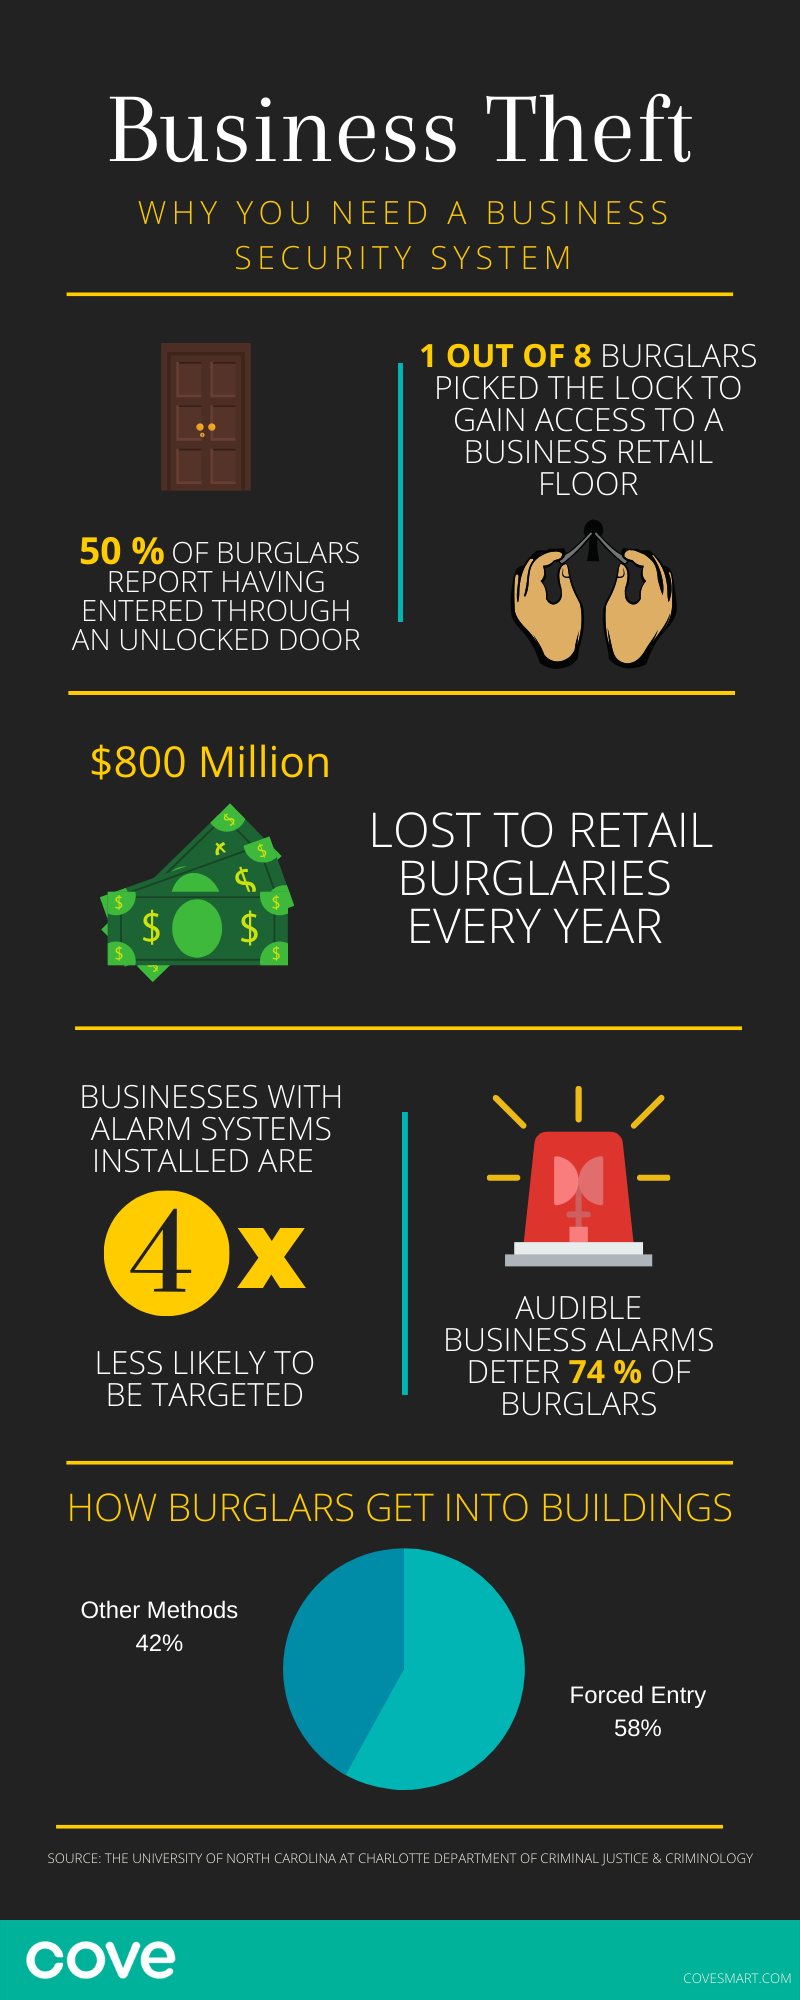 Why you need a business security system. Audible business alarms deter 74% of burglars. 800 million dollars lost every year.